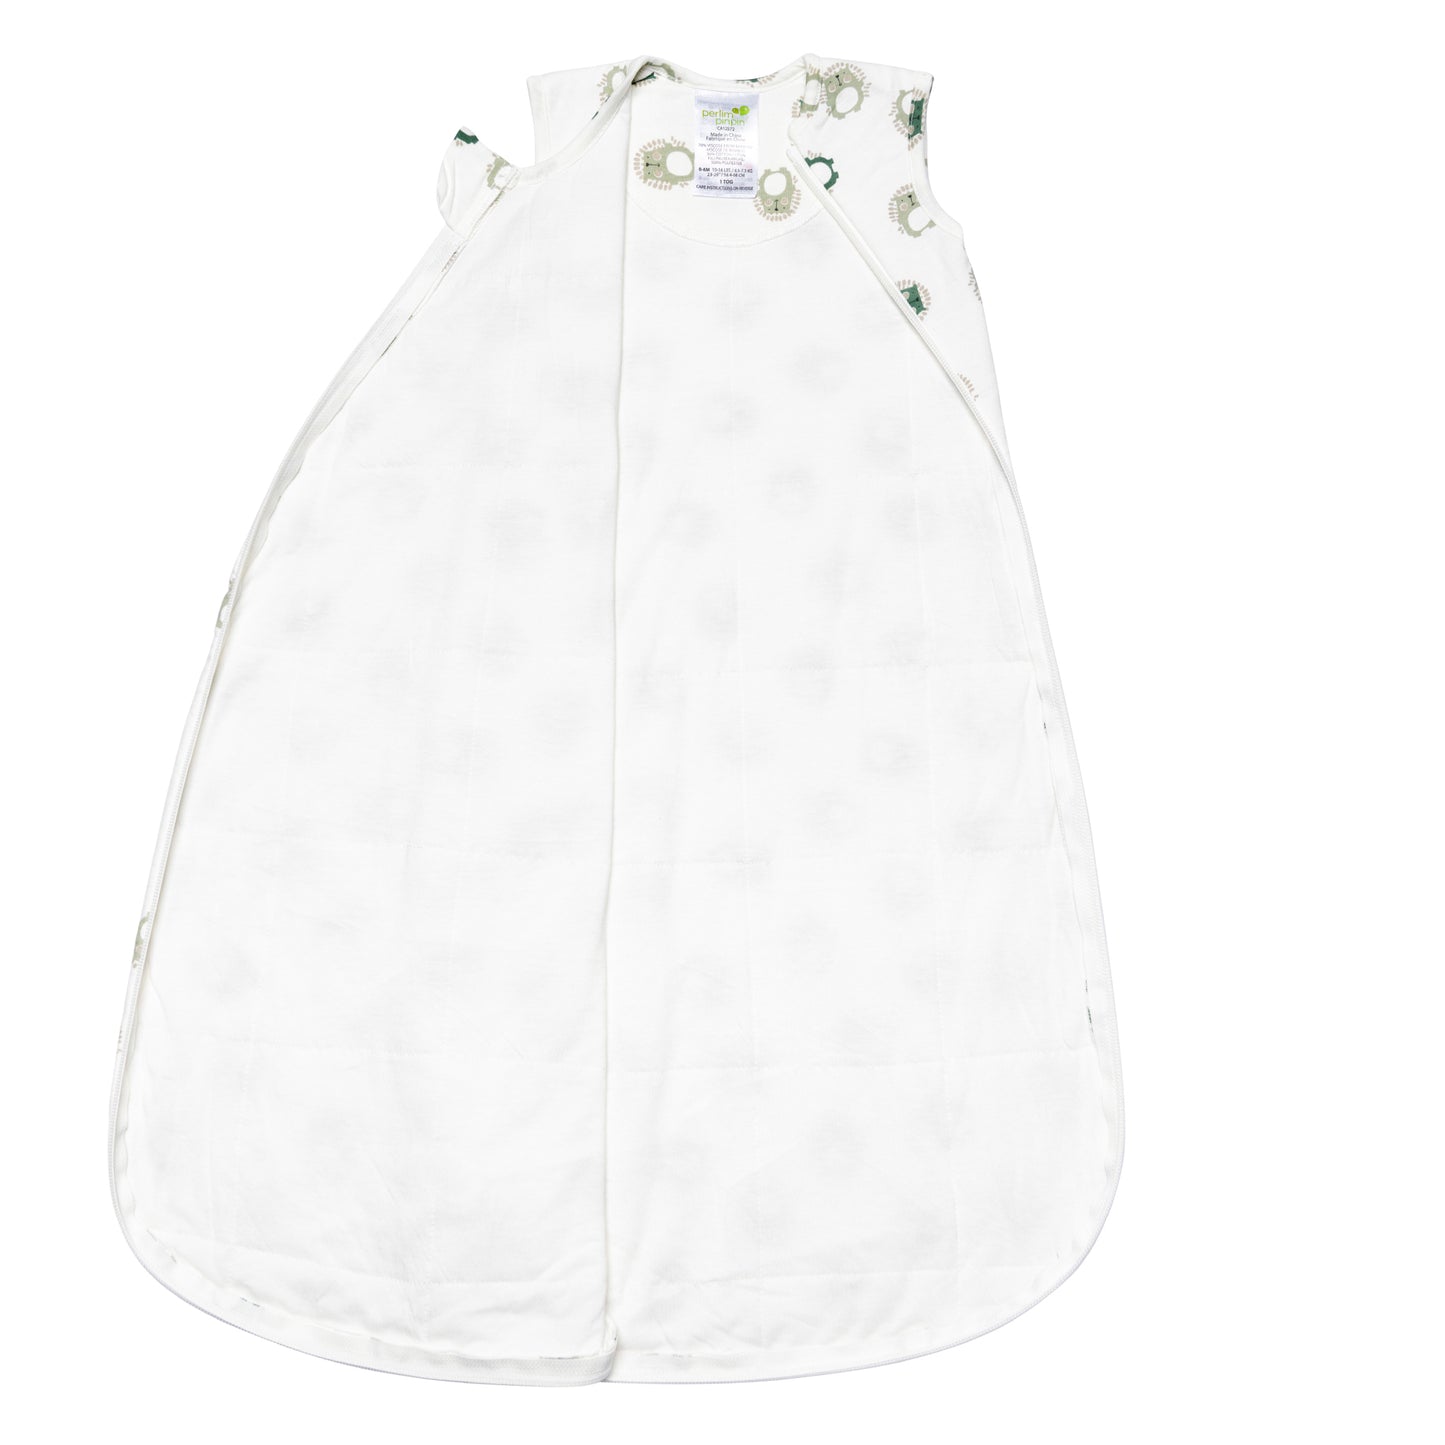 Quilted bamboo sleep sack - Porcupines (1.0 tog)